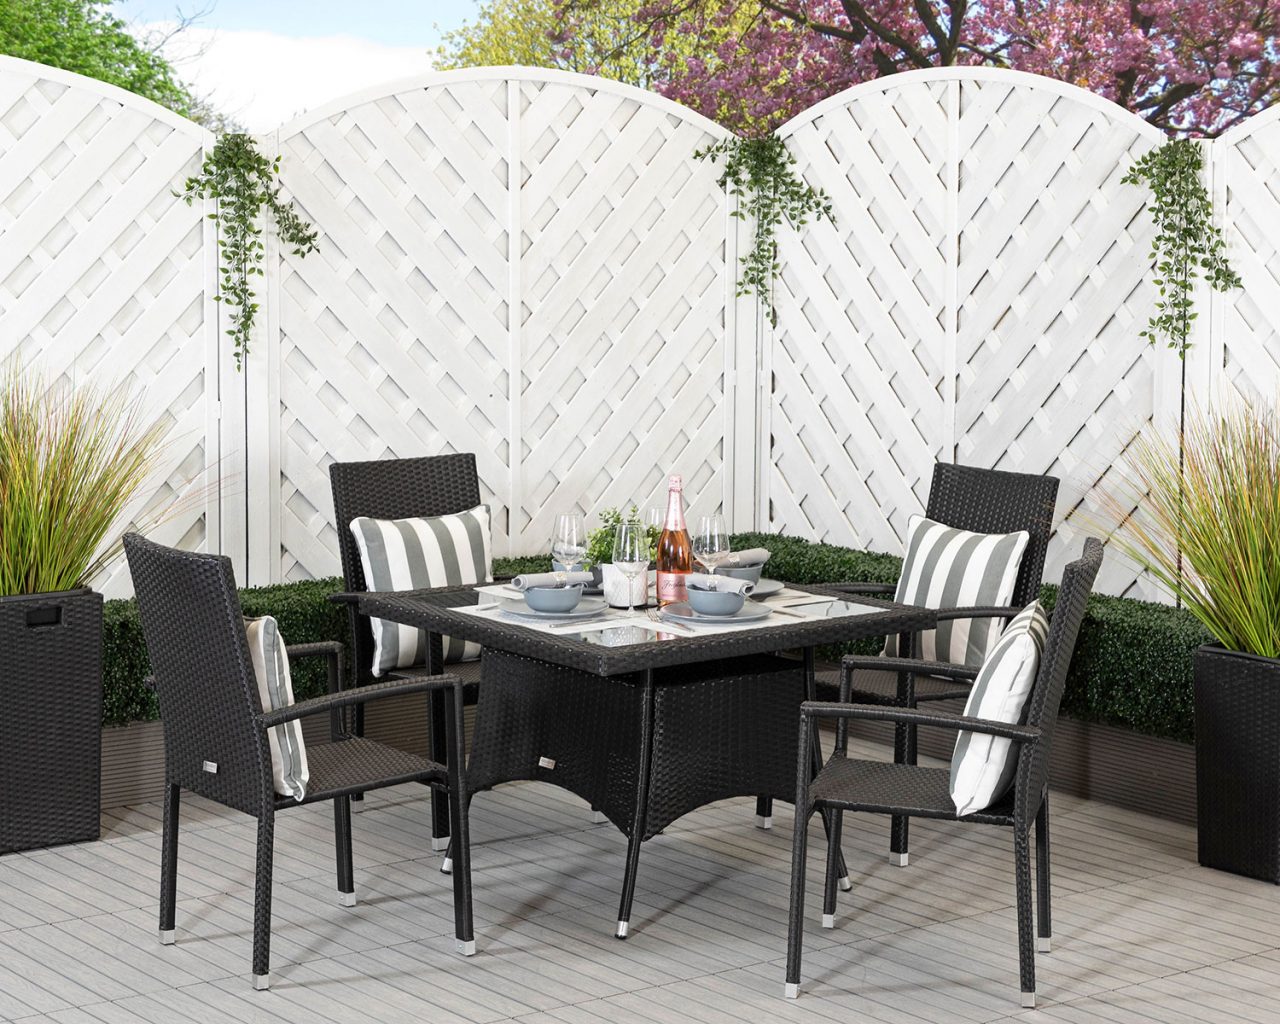 4 Seat Rattan Garden Dining Set With Square Dining Table in Black - Rio